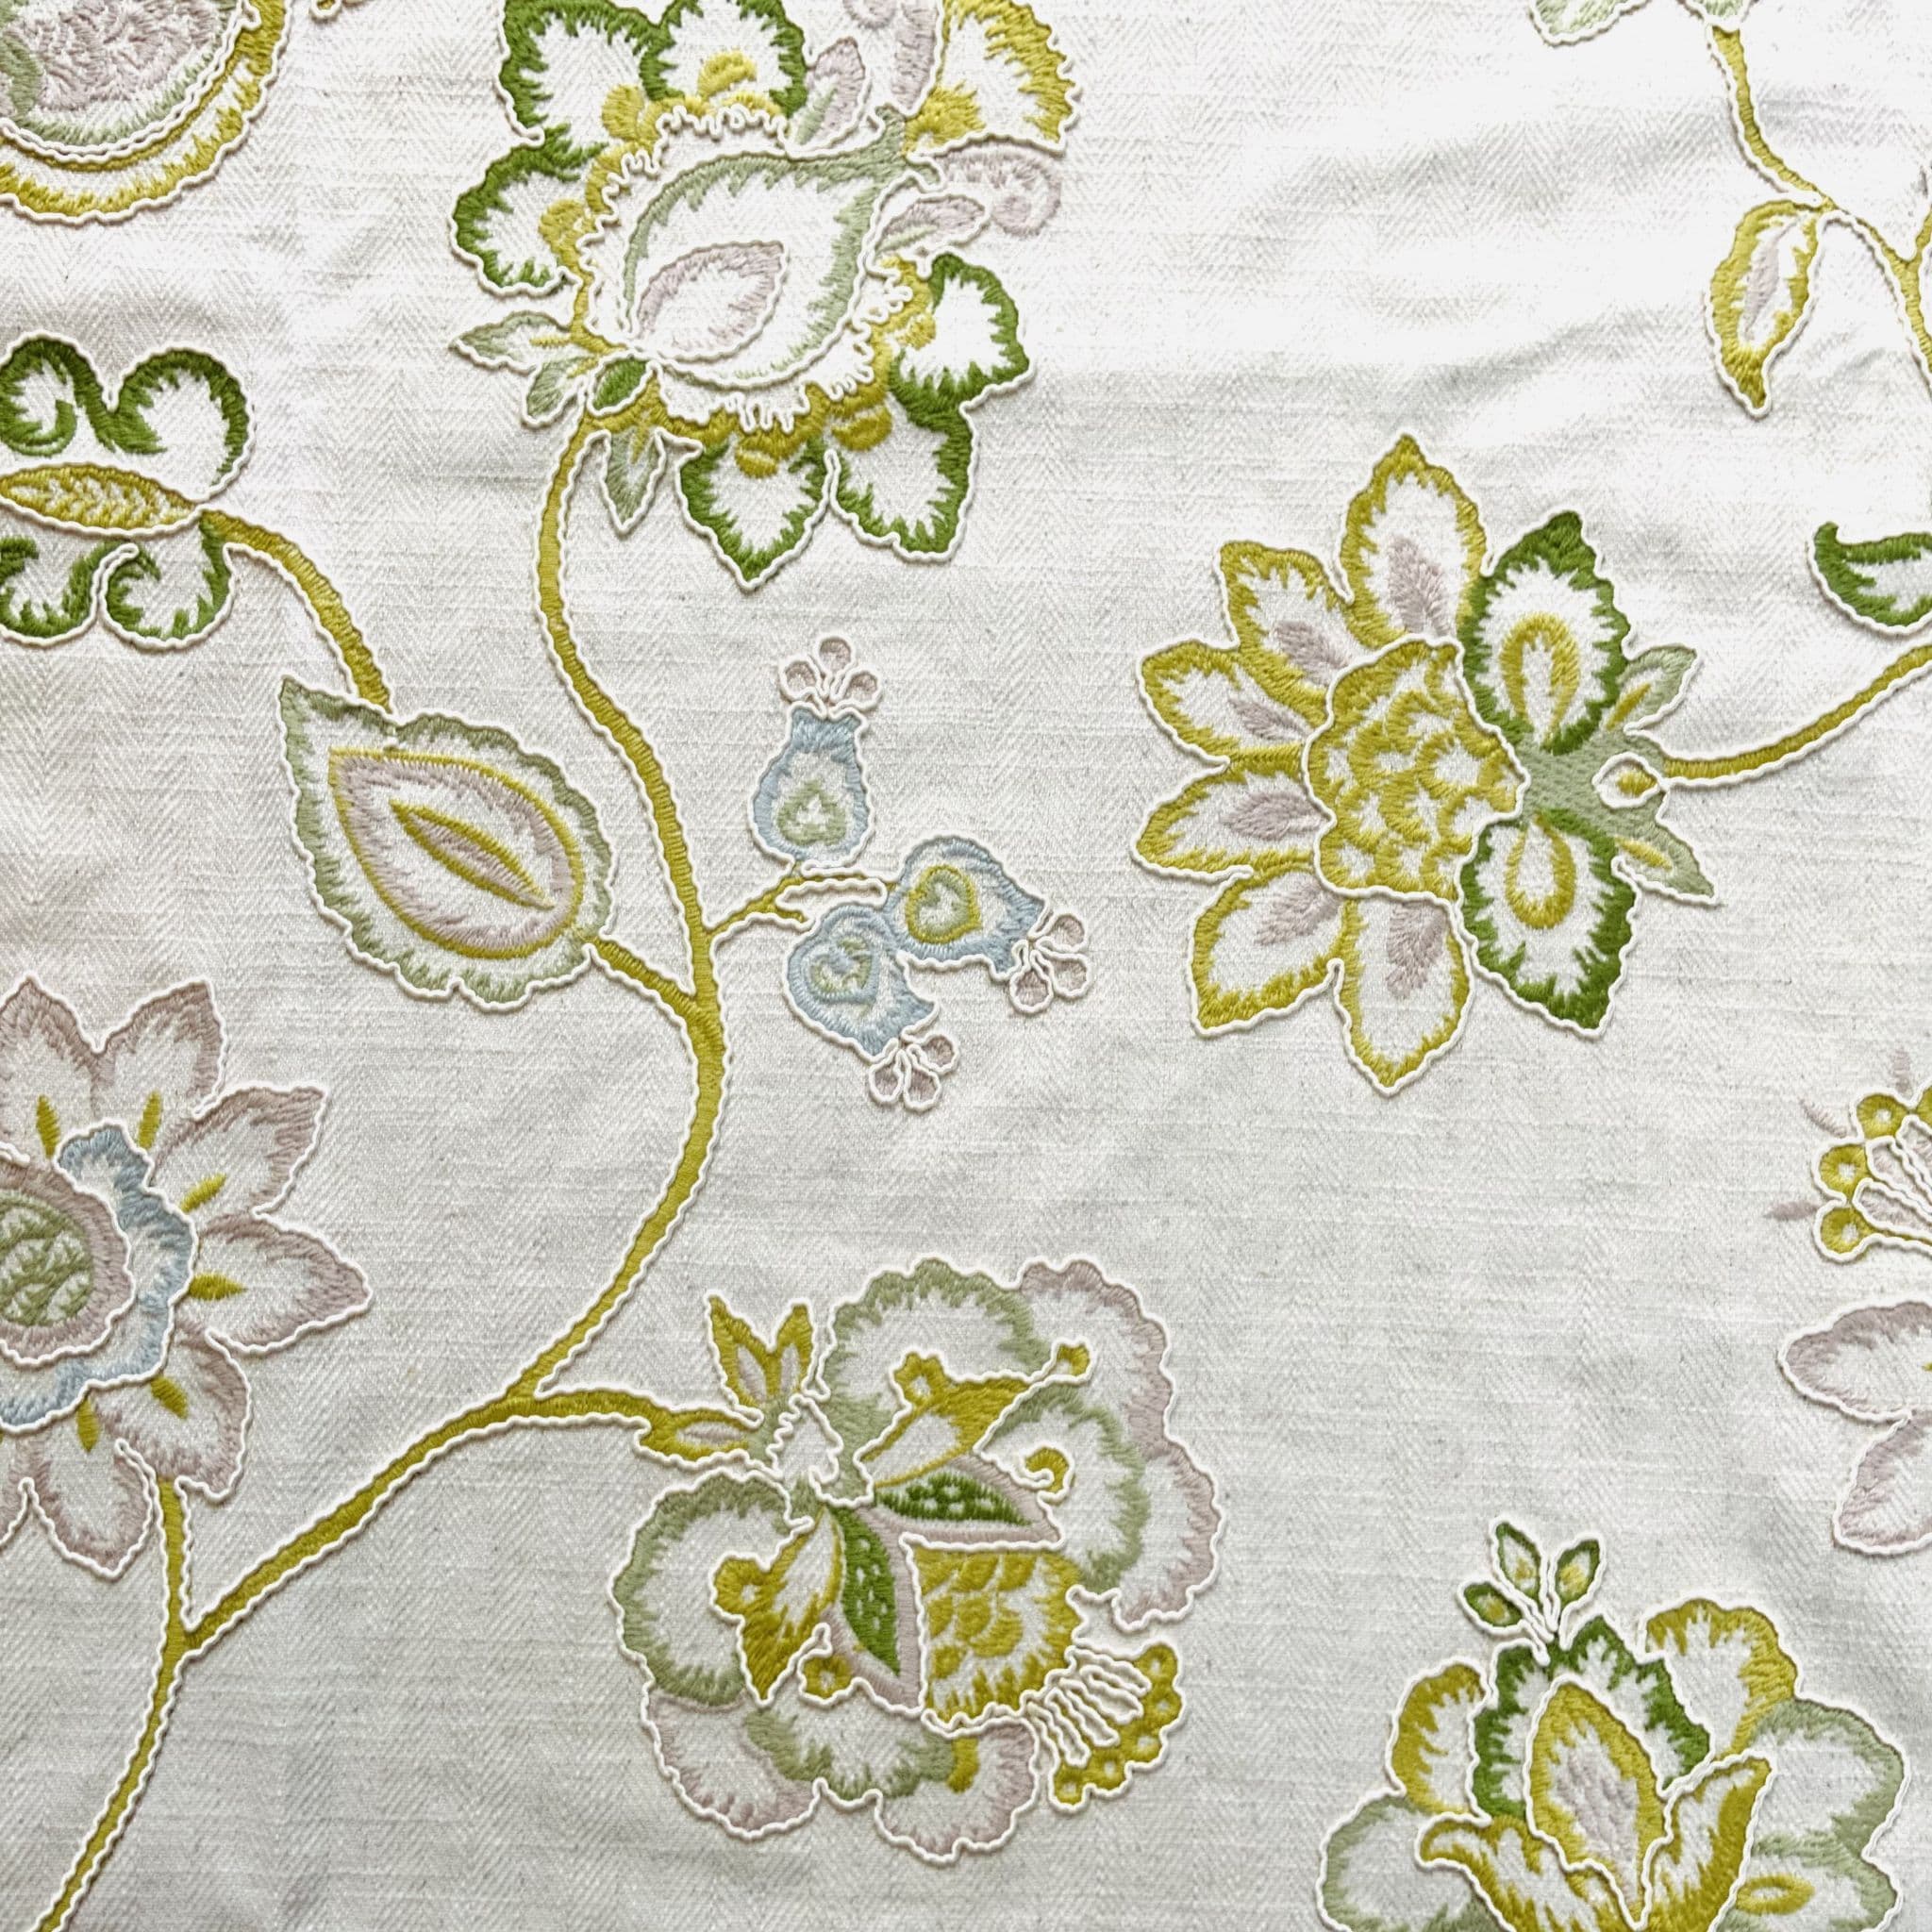 Prestigious Tiverton Embroidered Fabric in Willow. 1.4 mts